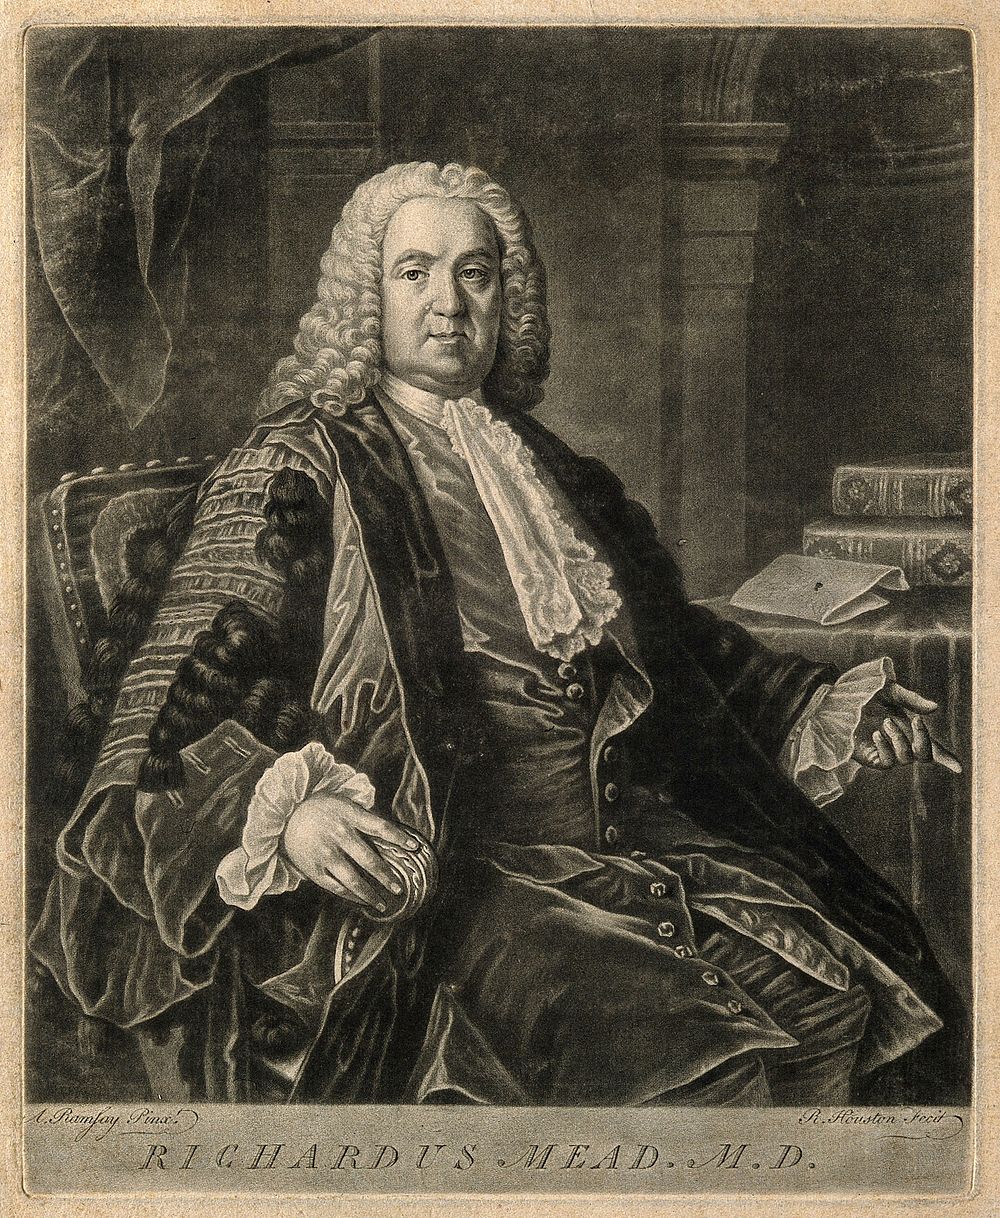 Richard Mead. Mezzotint by R. Houston after A. Ramsay.